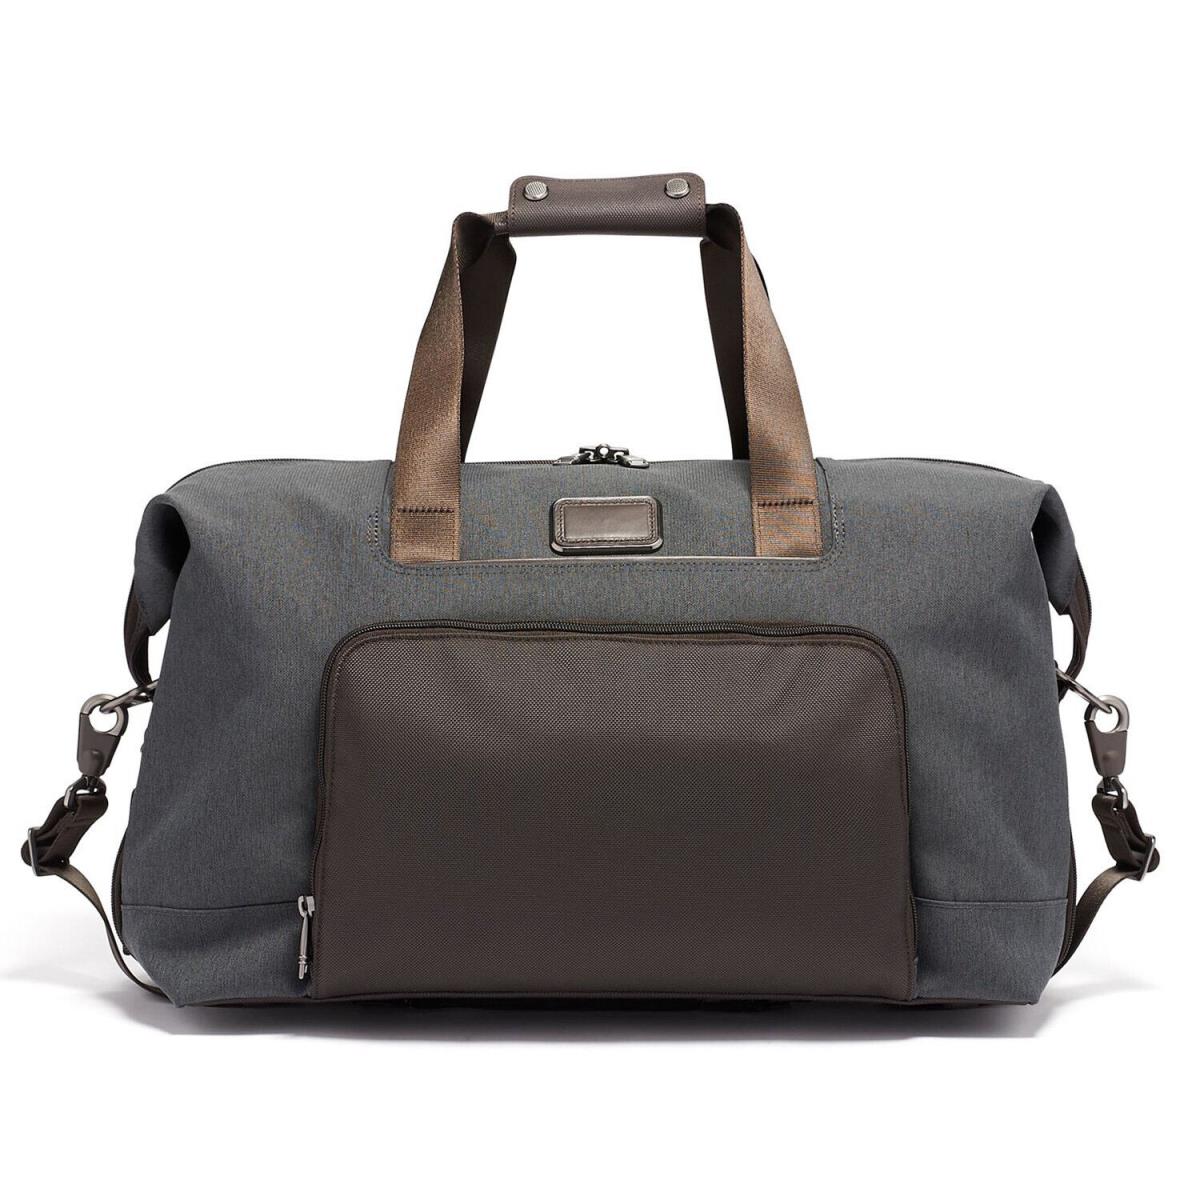 Tumi Alpha 3 Double Expansion Travel Satchel - Anthracite - 117317-1009 - Gray